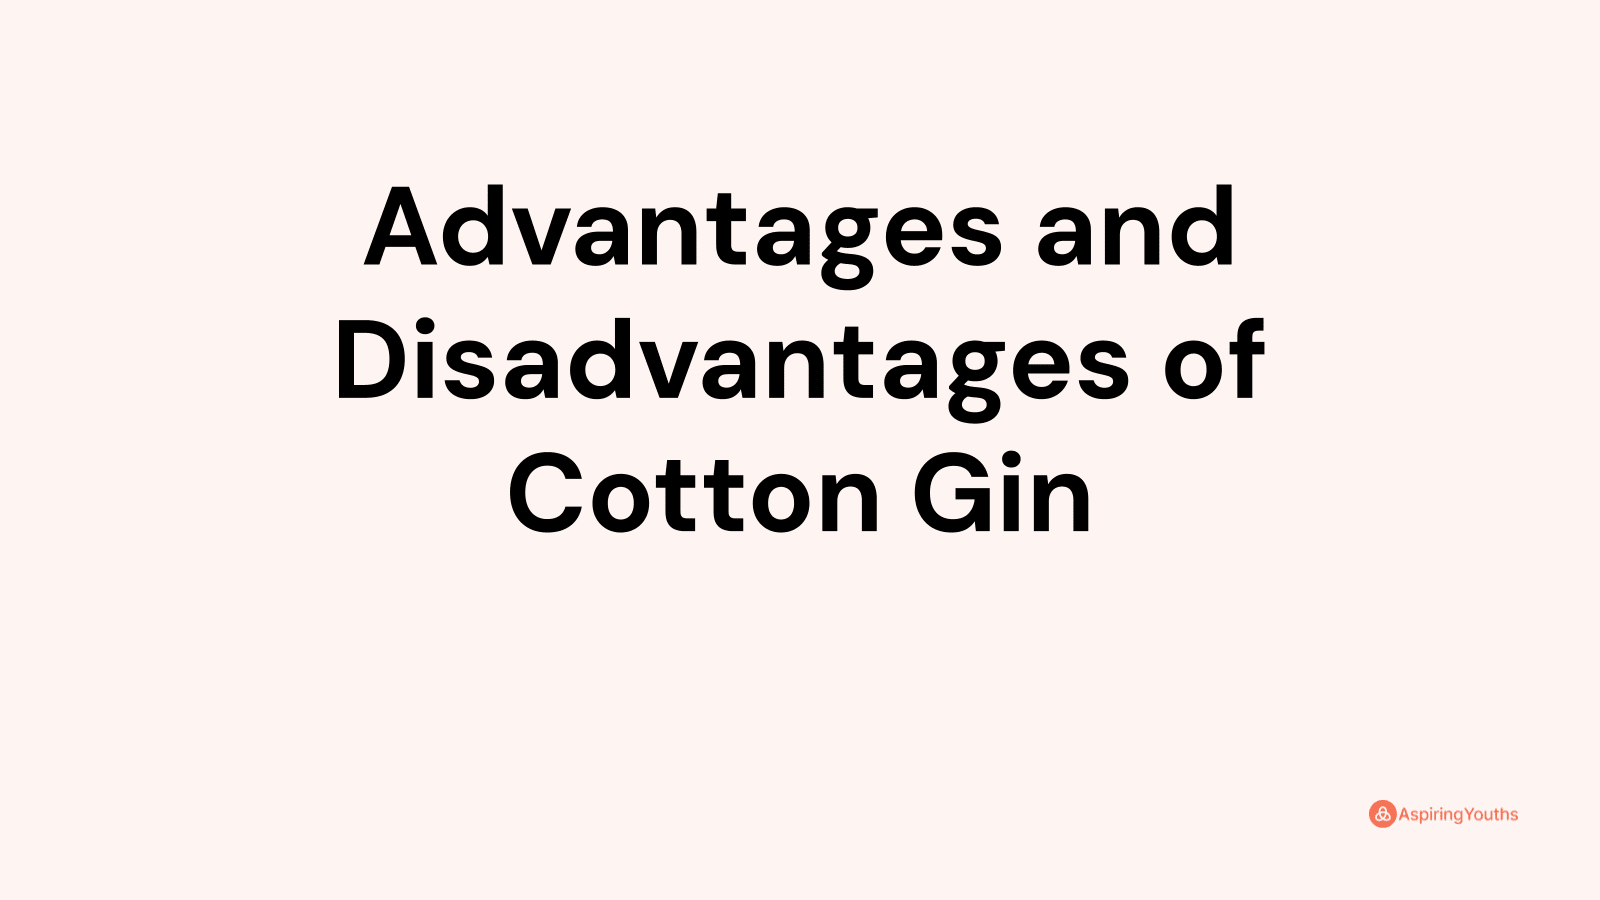 Advantages and disadvantages of Cotton Gin